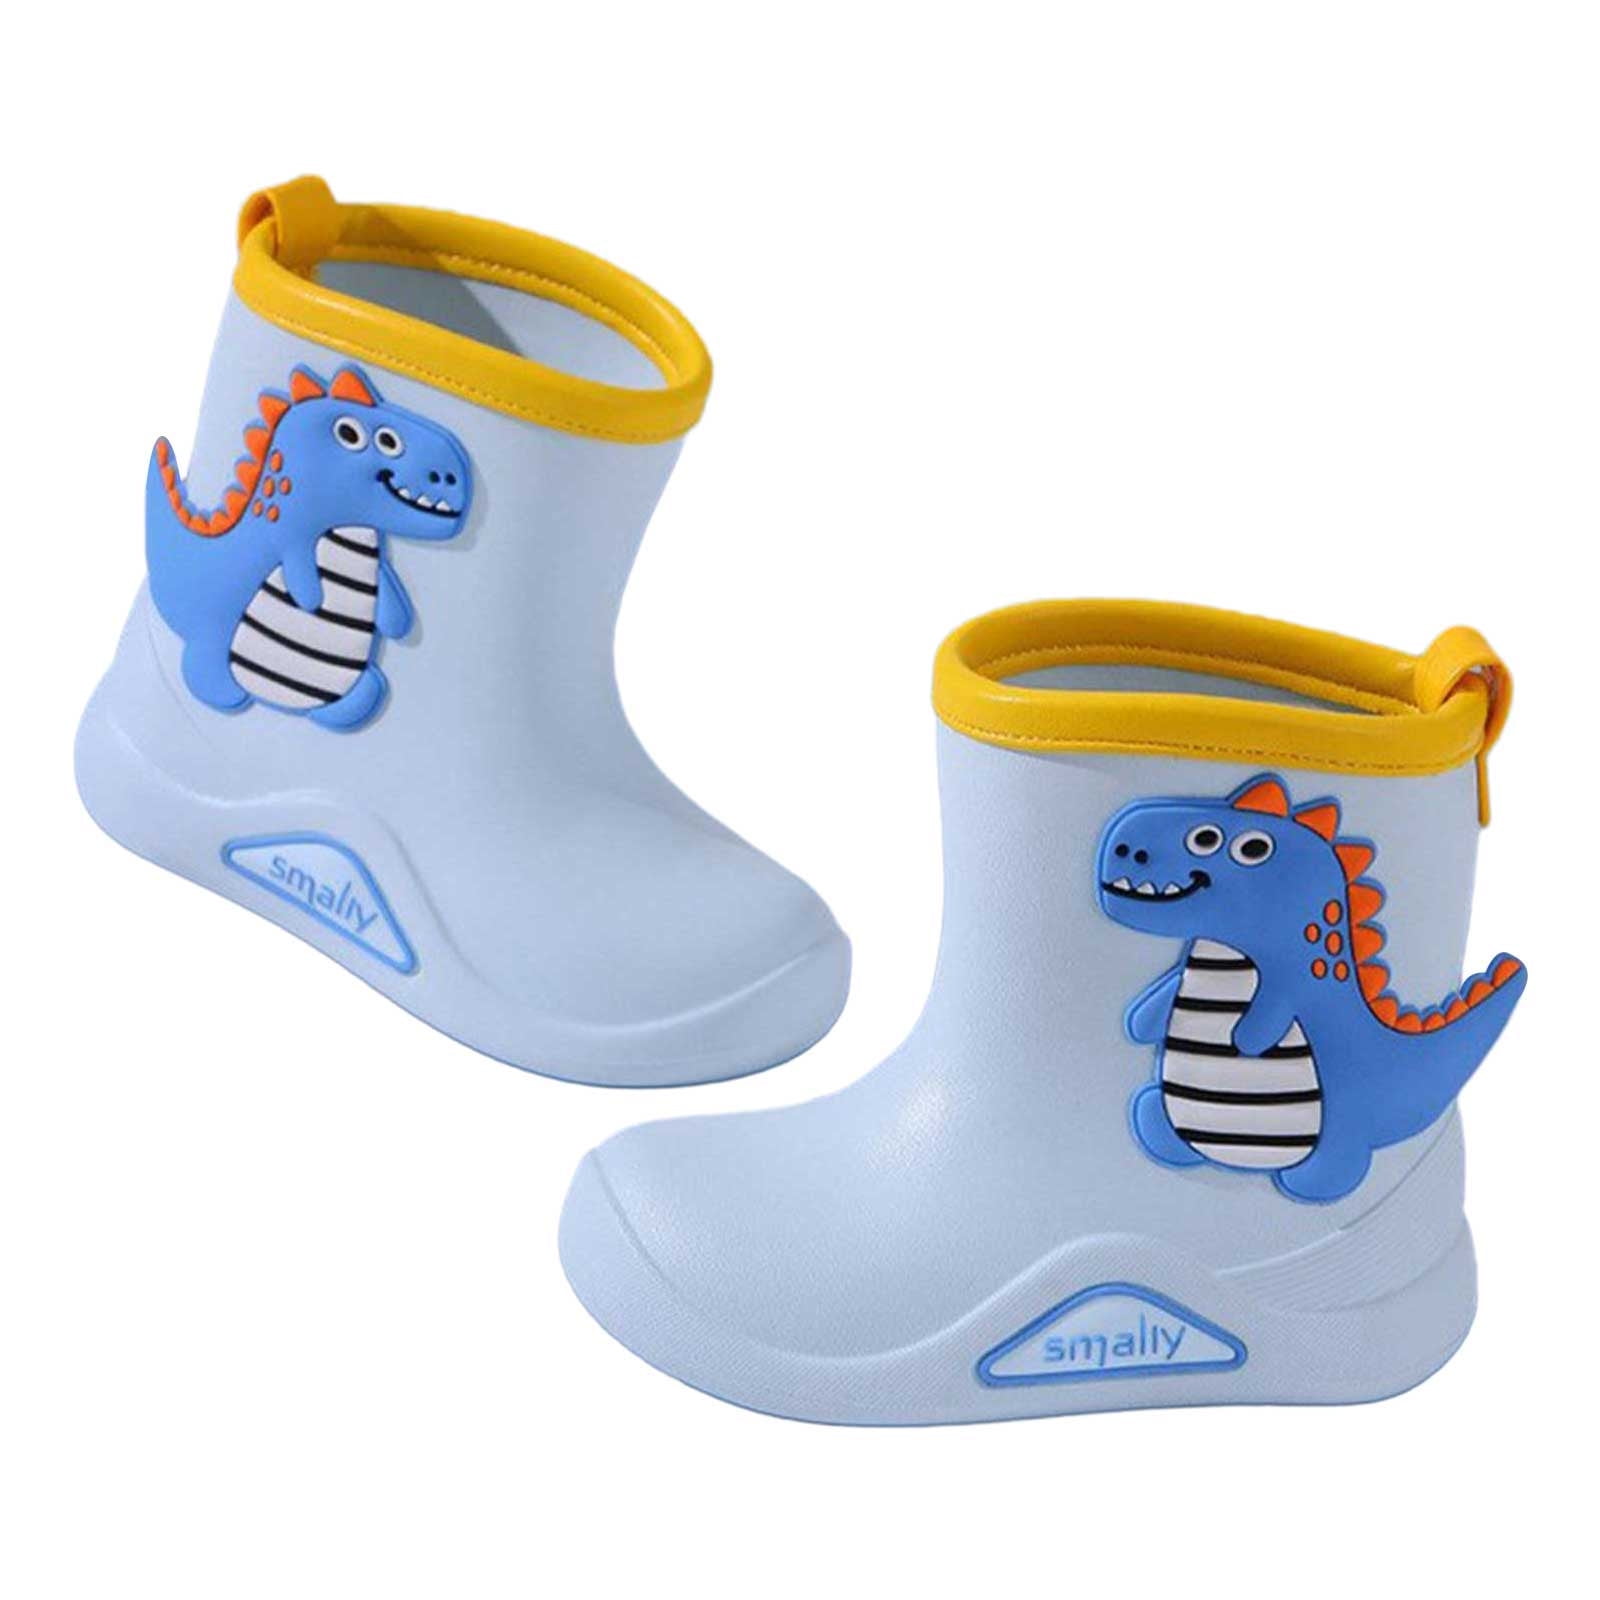 Ketyyh-chn99 Rain Boots for Boys Water Shoes Baby Kids Easy On Rain ...